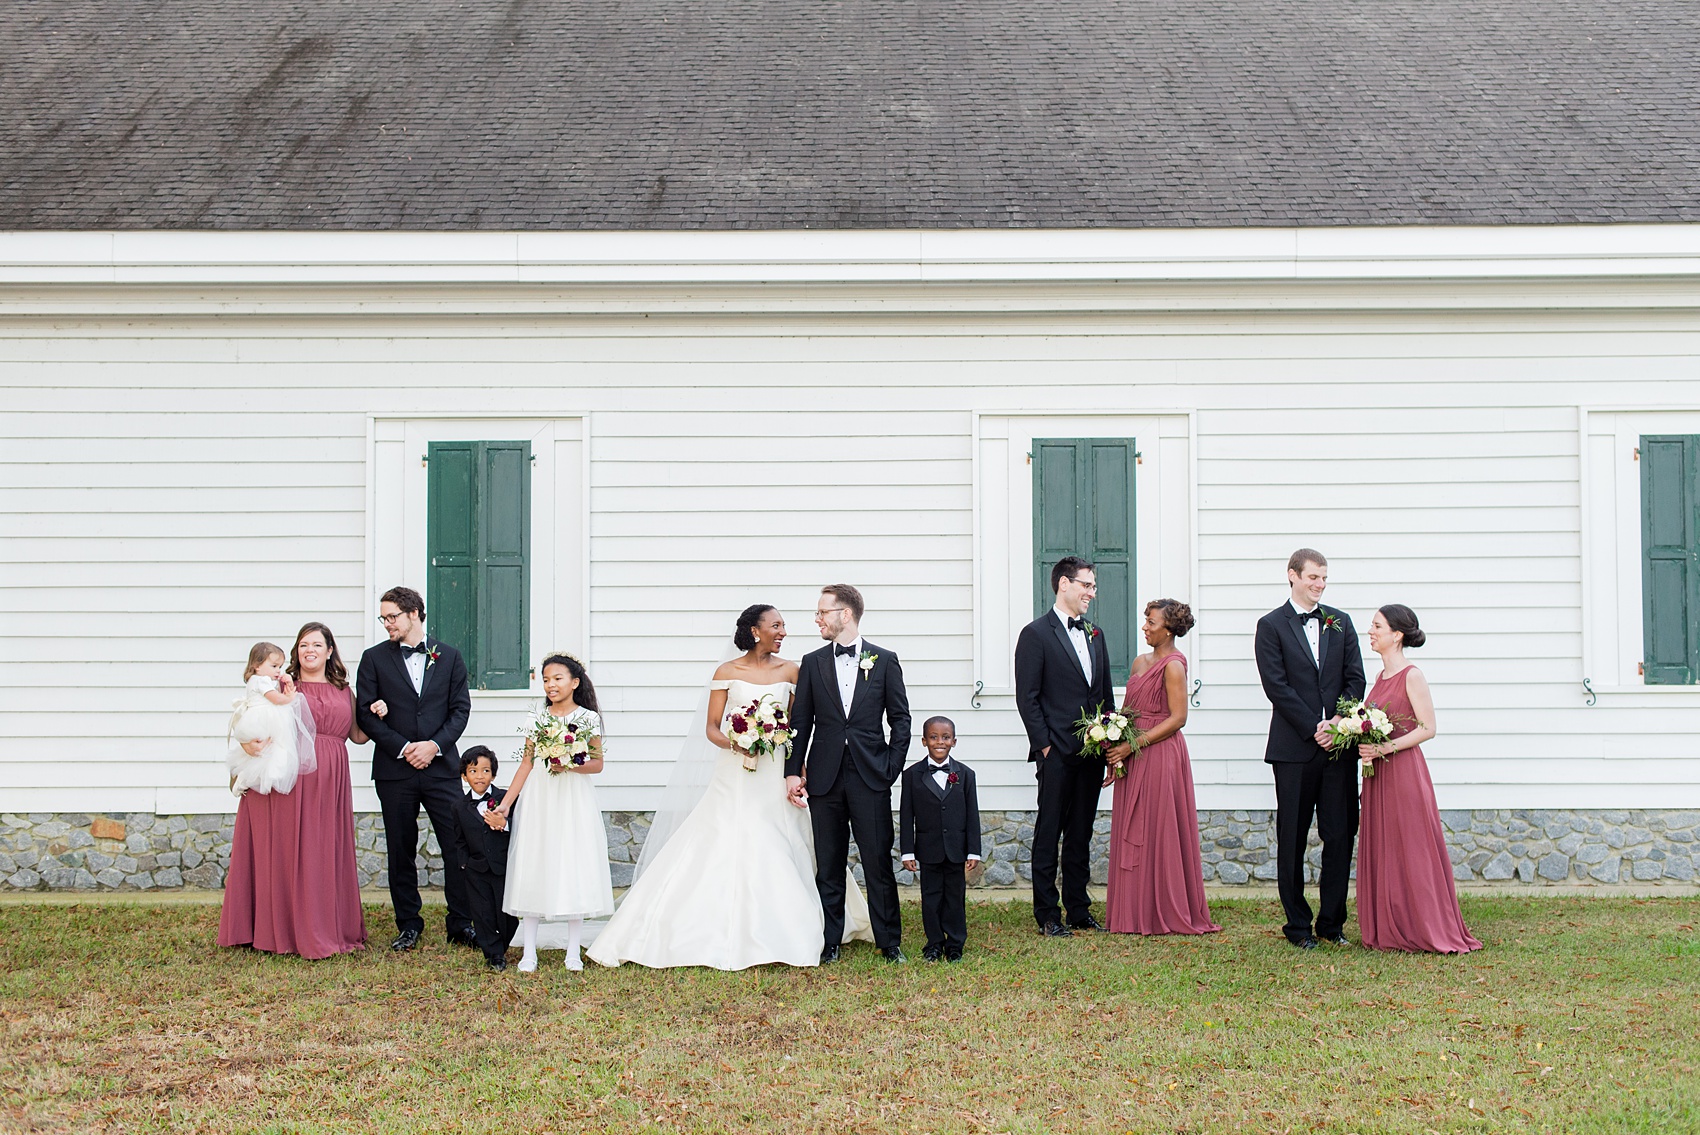 A fall wedding with burgundy, dusty rose and grey details. The bride and groom had three bridesmaids and groomsmen each, with the bridesmaids in cinnamon colored gowns and groomsmen in tuxedos. Mikkel Paige Photography, photographer in Greenville NC and Raleigh captured this wedding at Rock Springs Center, planned by @vivalevent. Click through for more details and pictures from this autumn celebration! #mikkelpaige #northcarolinawedding #southernwedding #bridesmaids#weddingparty #bridalparty